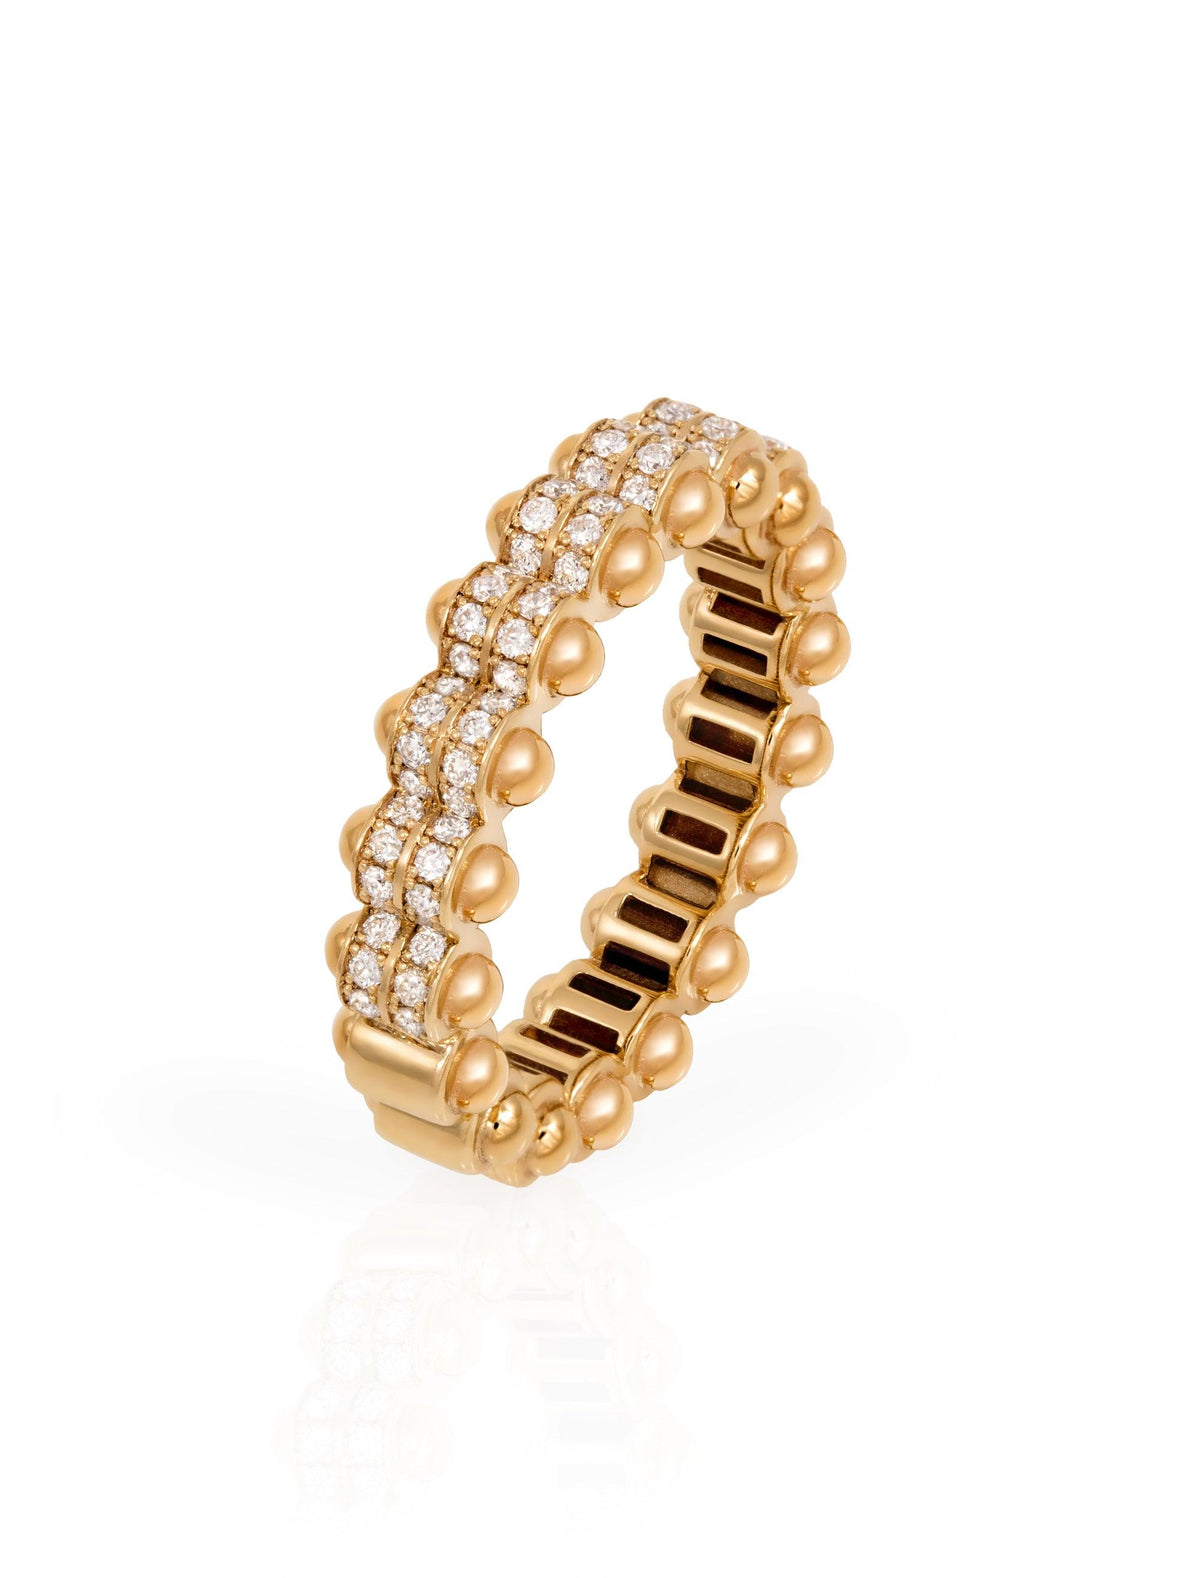 The Gold Atom Ring by L'Atelier Nawbar (Size 2) - Tales of Stones